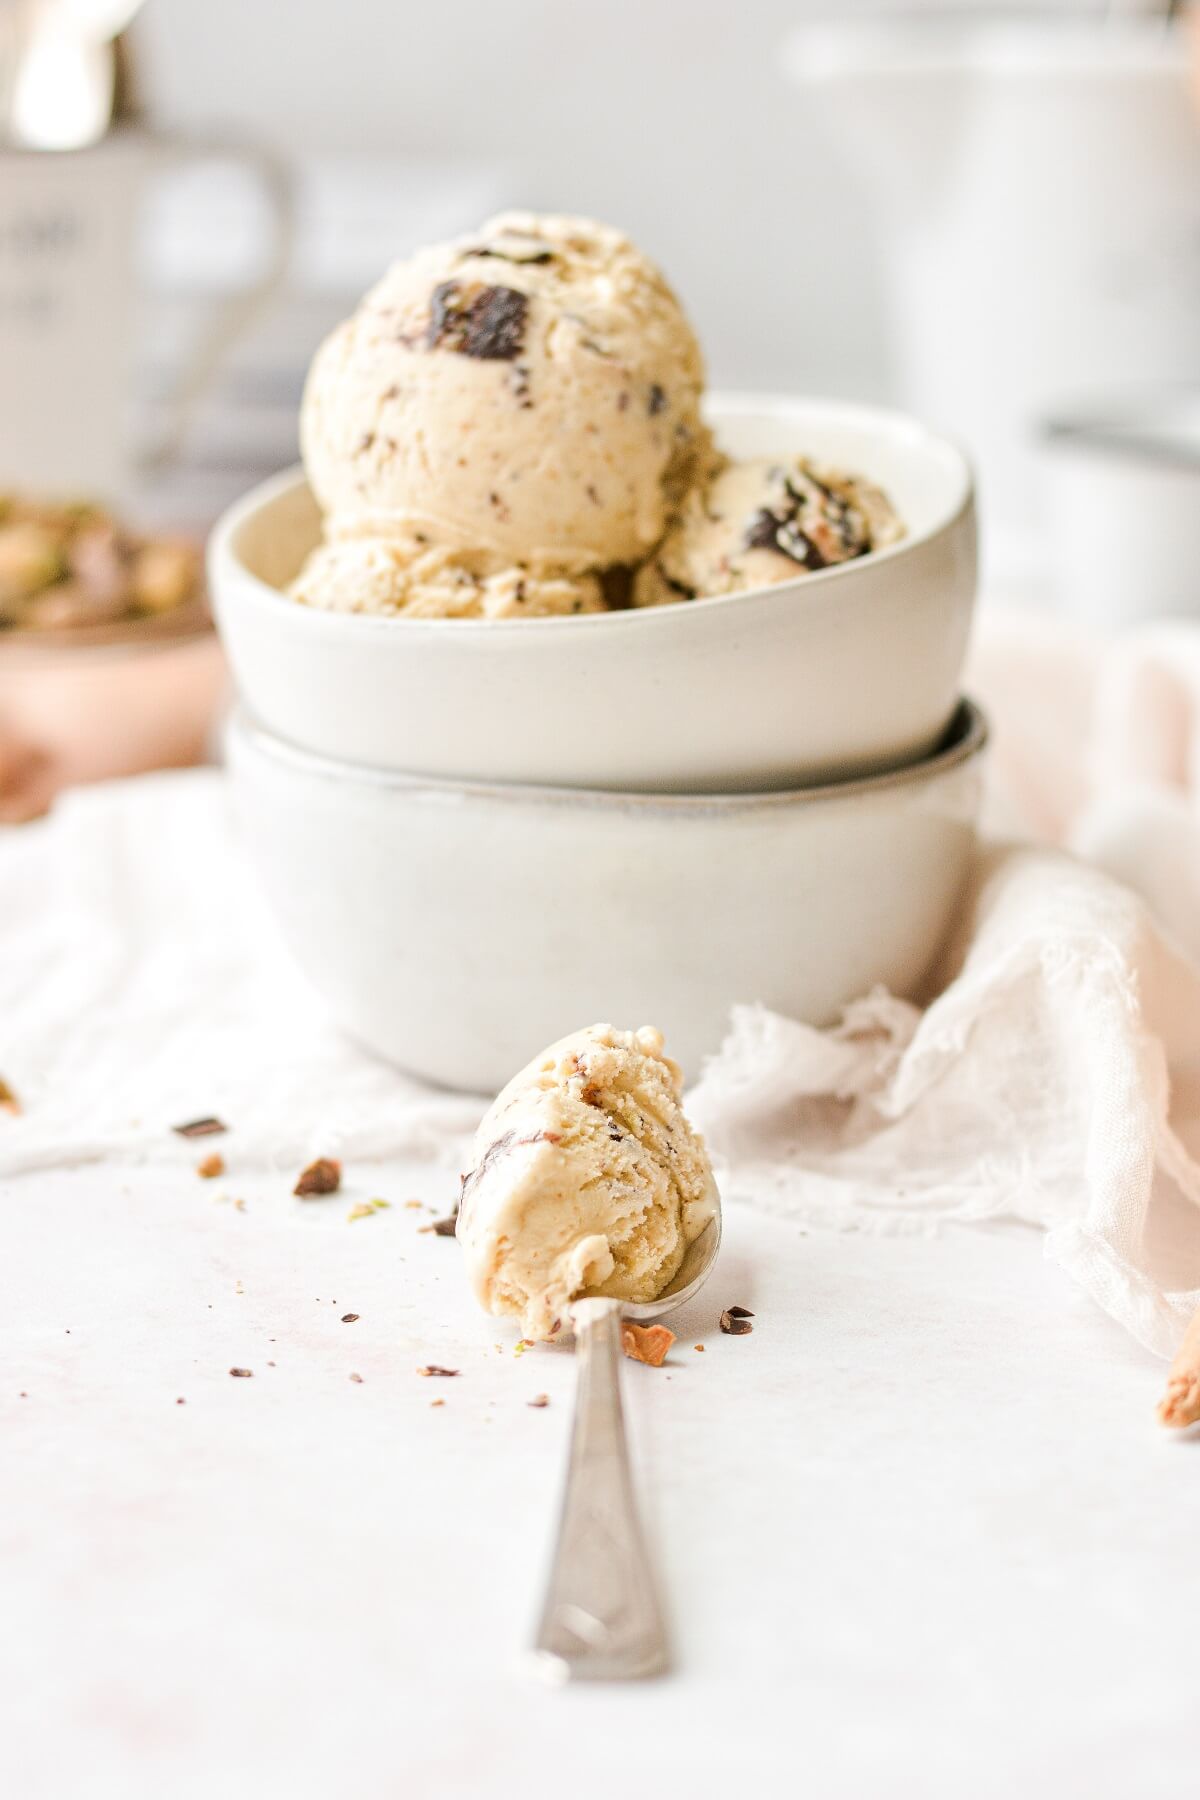 A spoonful of pistachio ice cream, next to a stack of bowls.